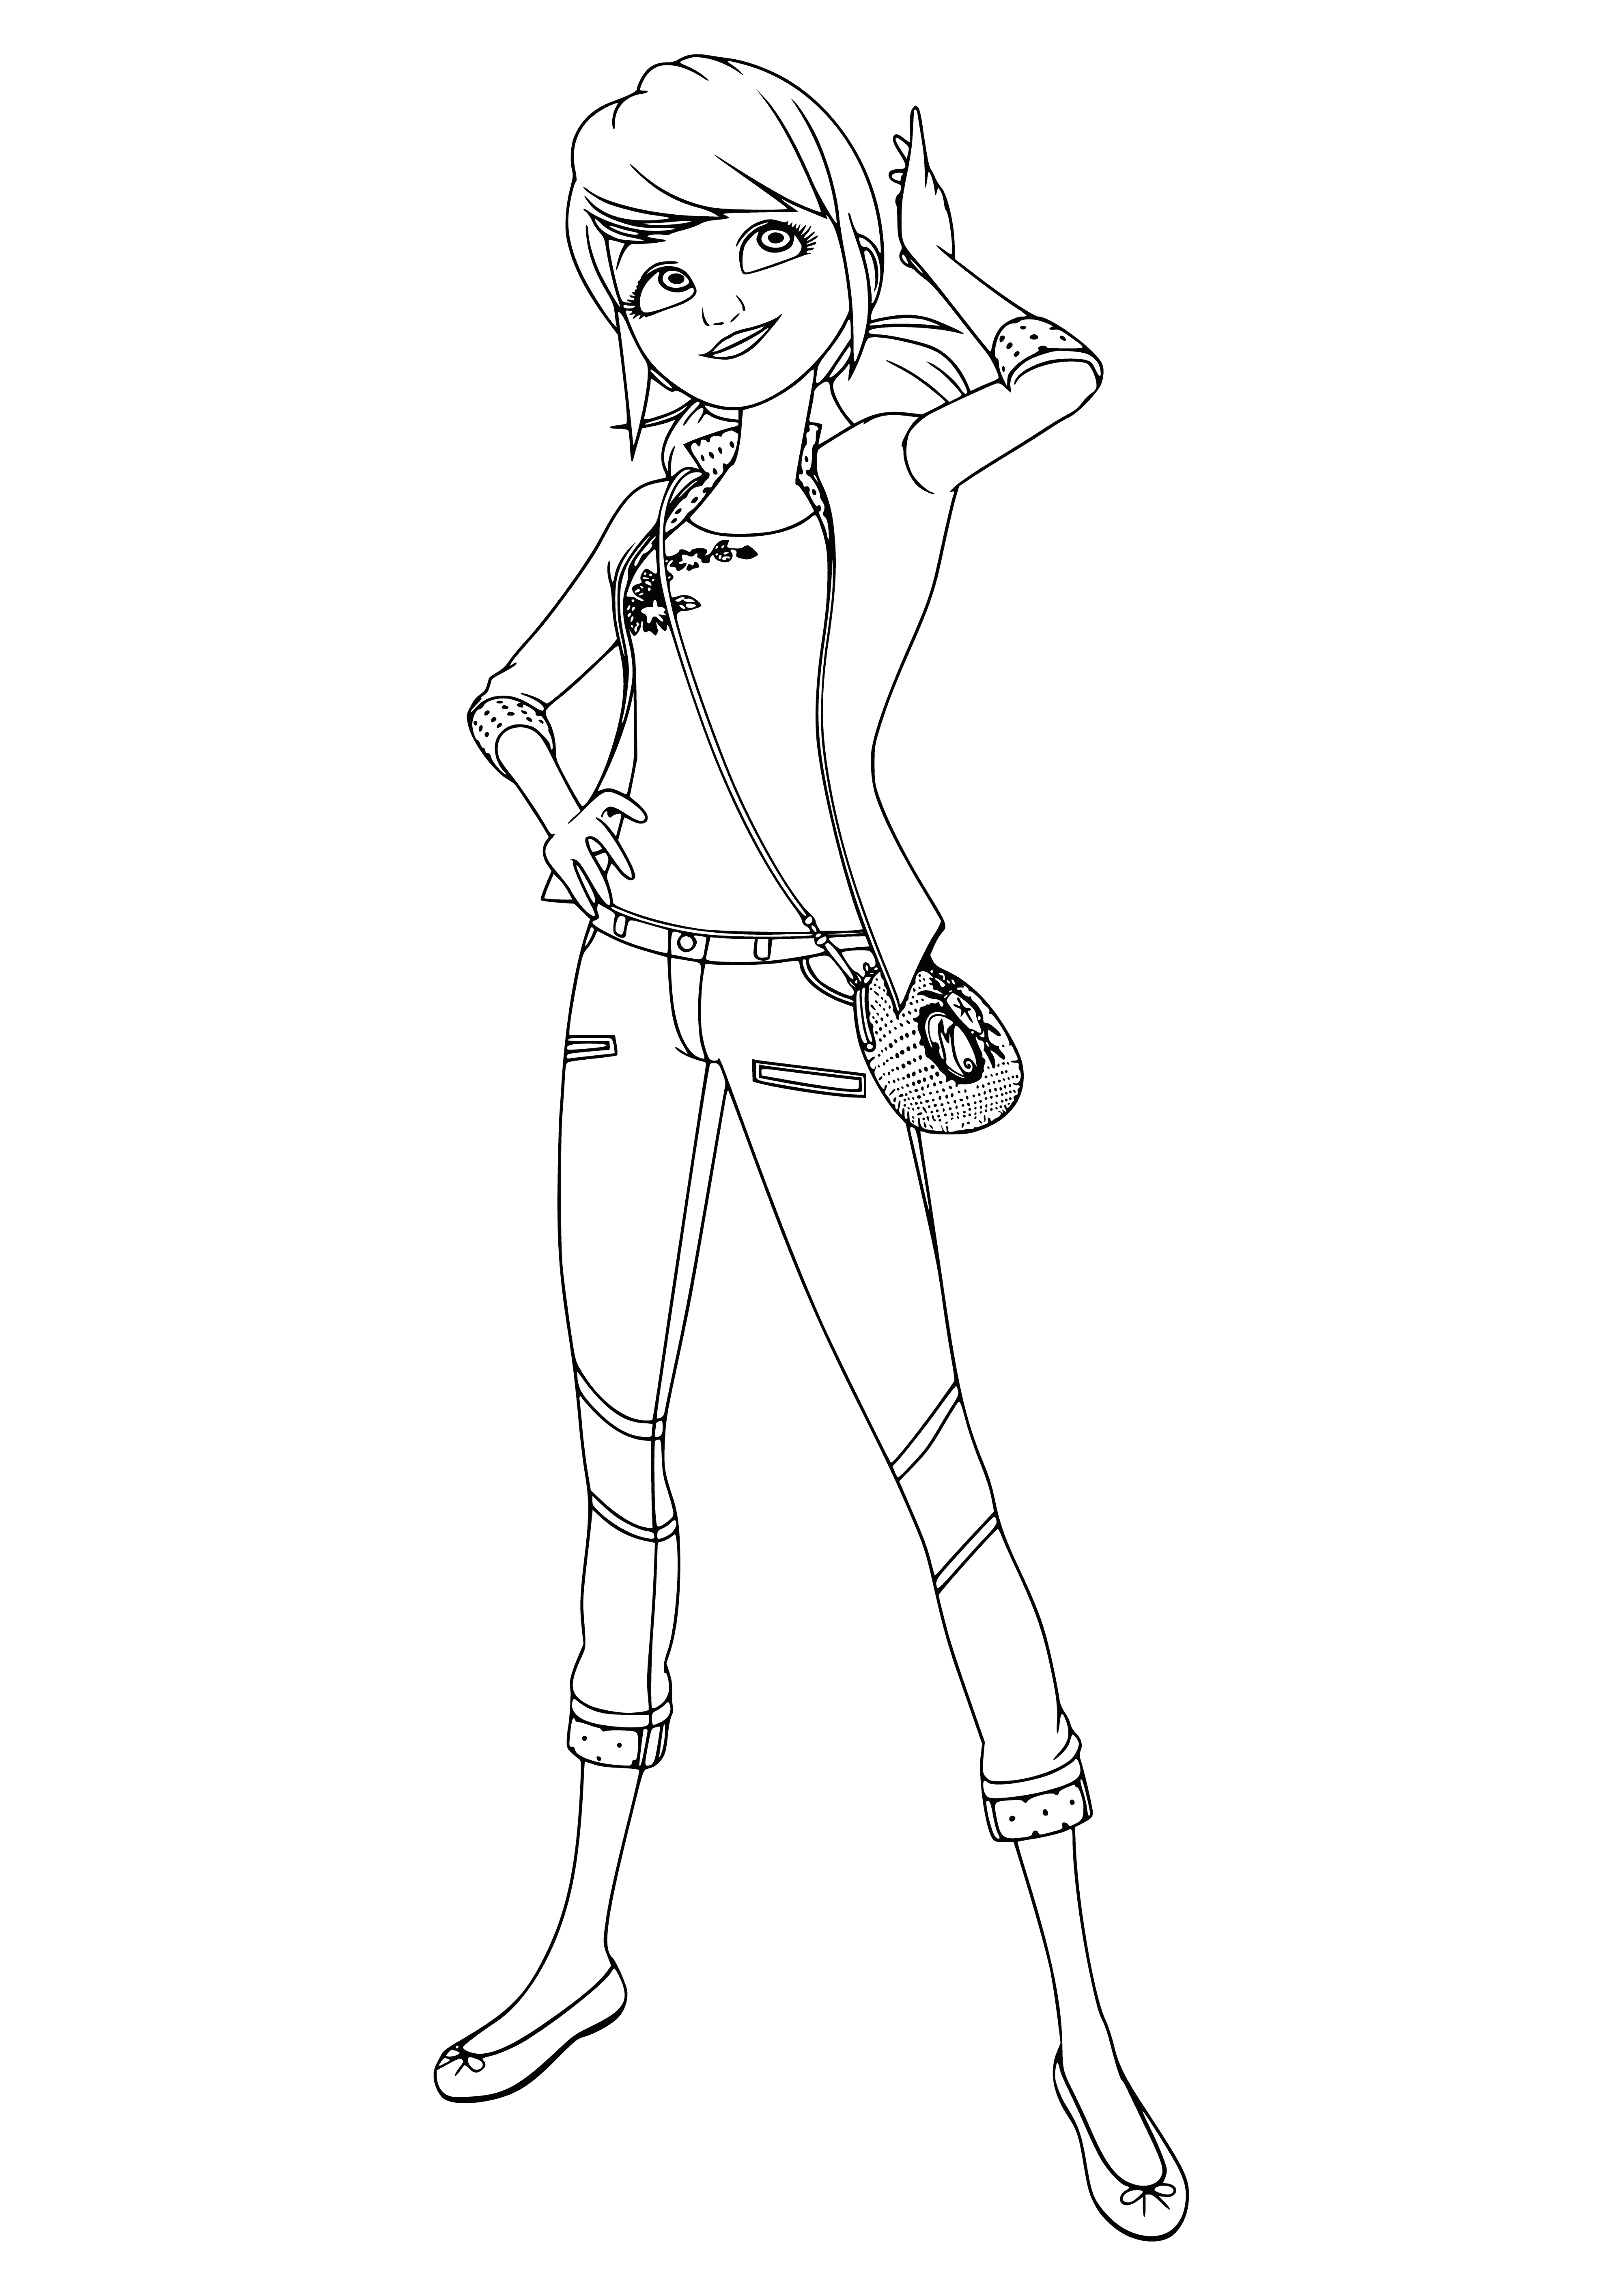 Marinette Dupont-Chen coloring page